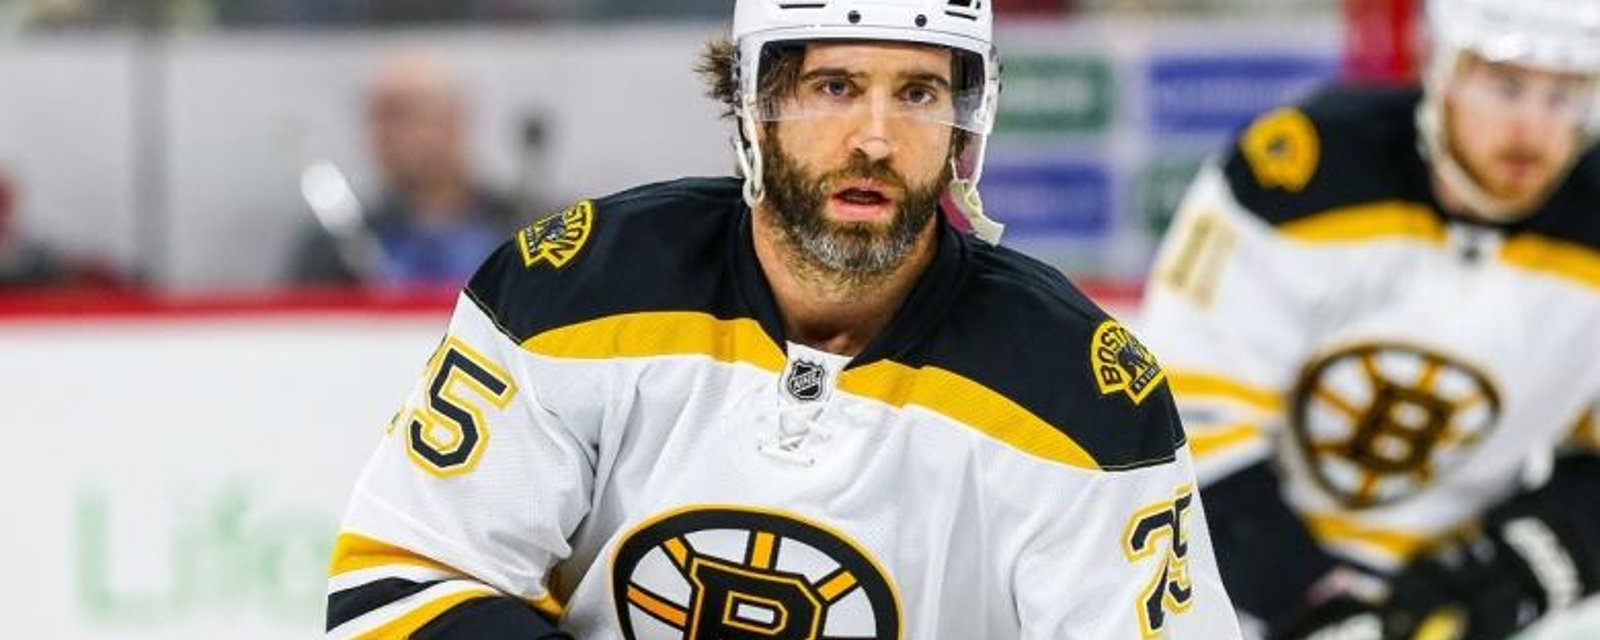 Max Talbot signs new contract officially done with the Bruins.